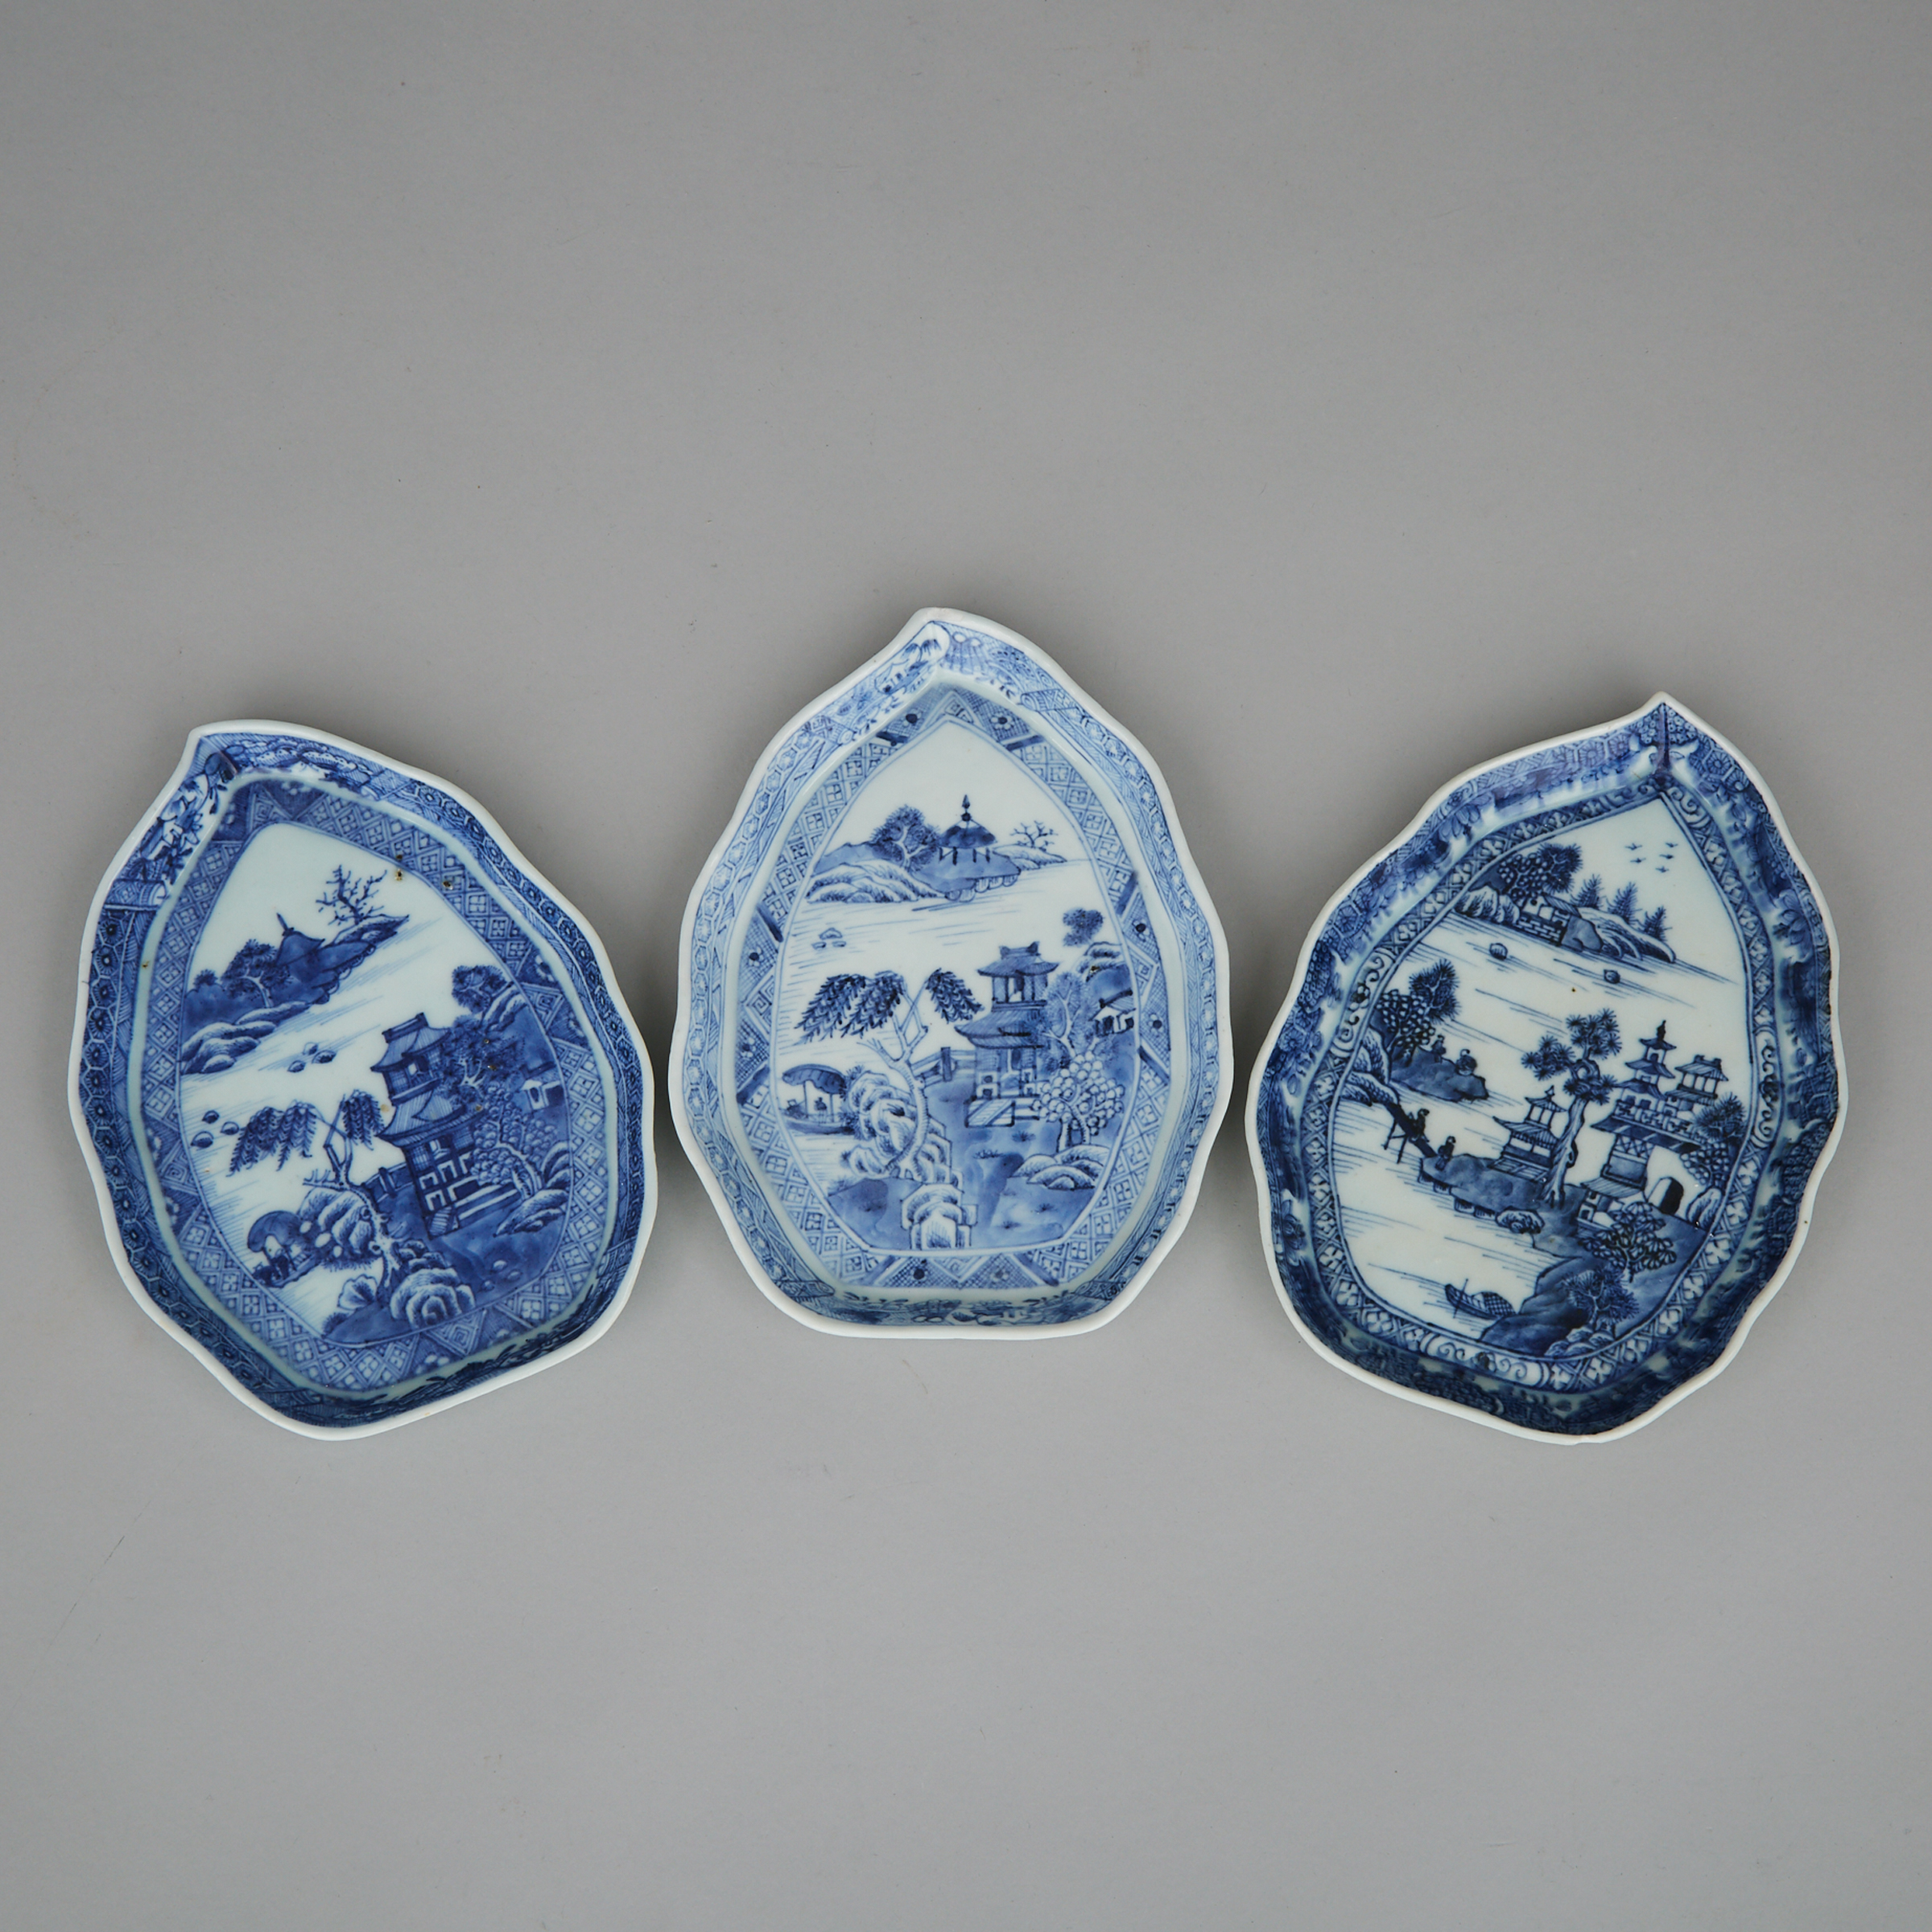 A Group of Three Chinese Blue and White Export Dishes, 19th Century